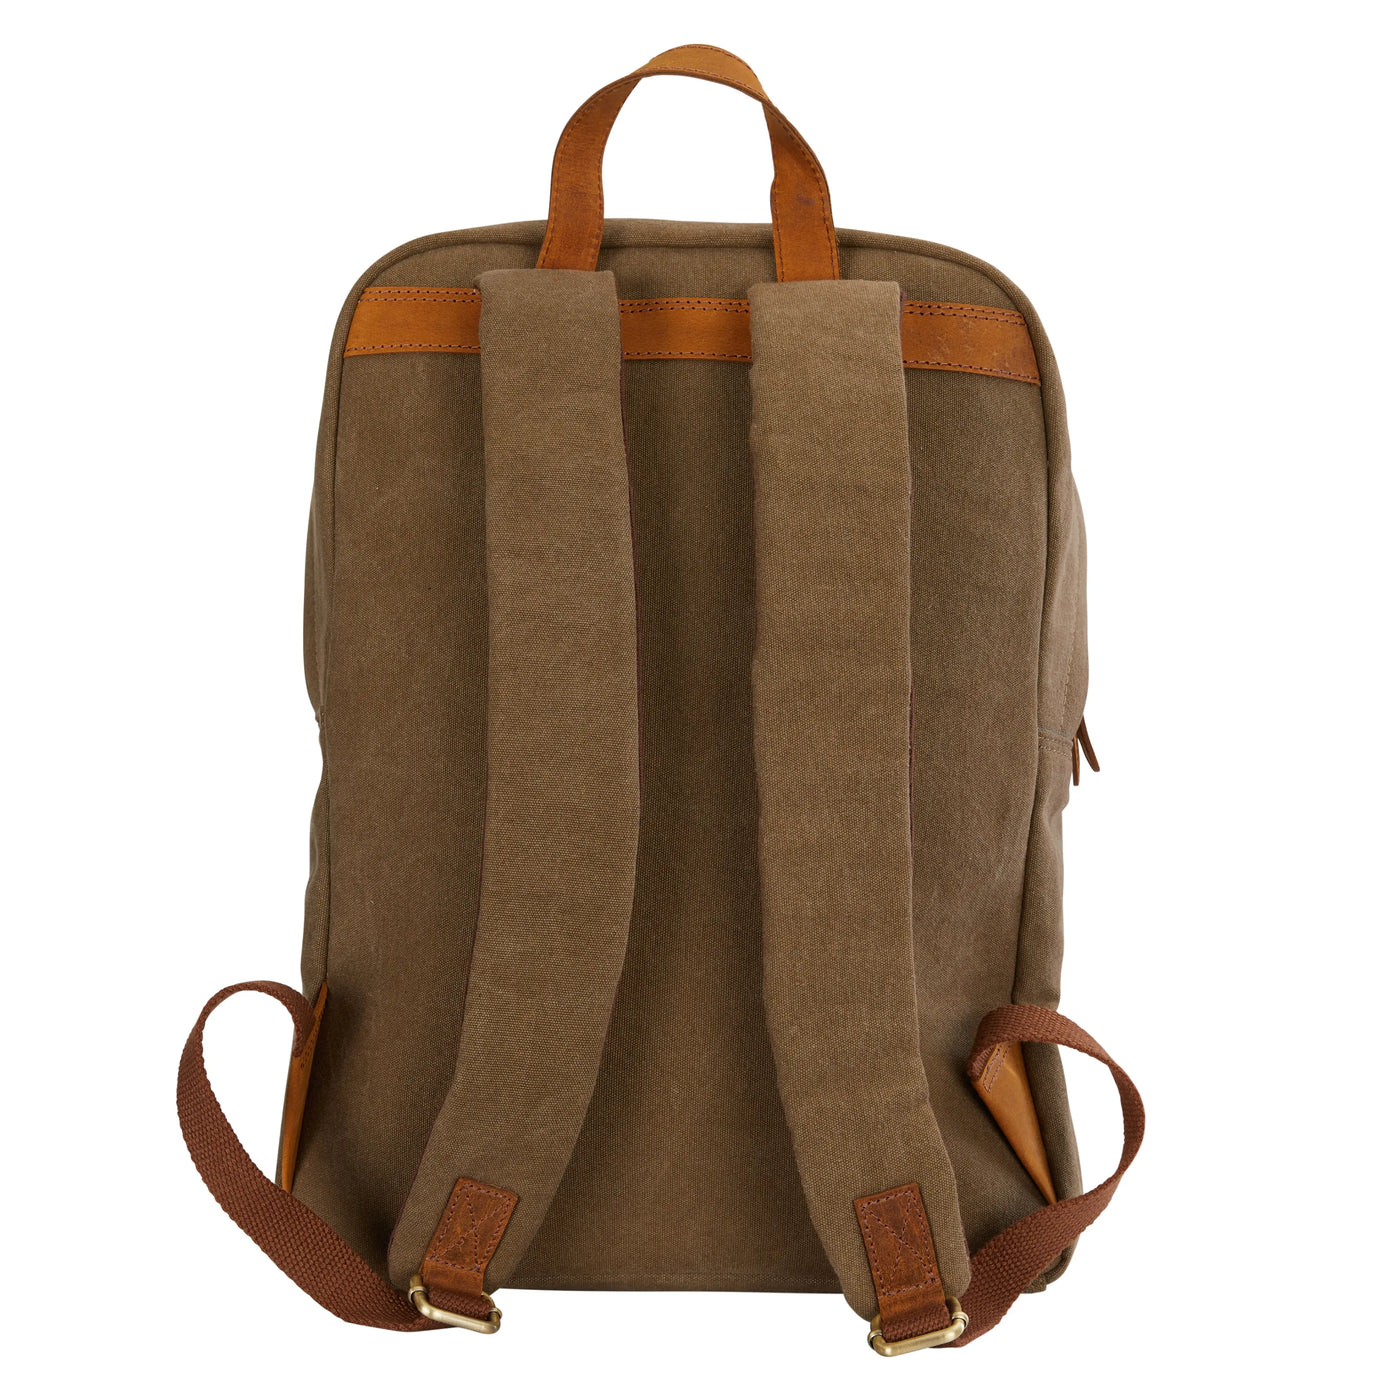 Noricum Canvas and Leather Rucksack in Khaki or Brown